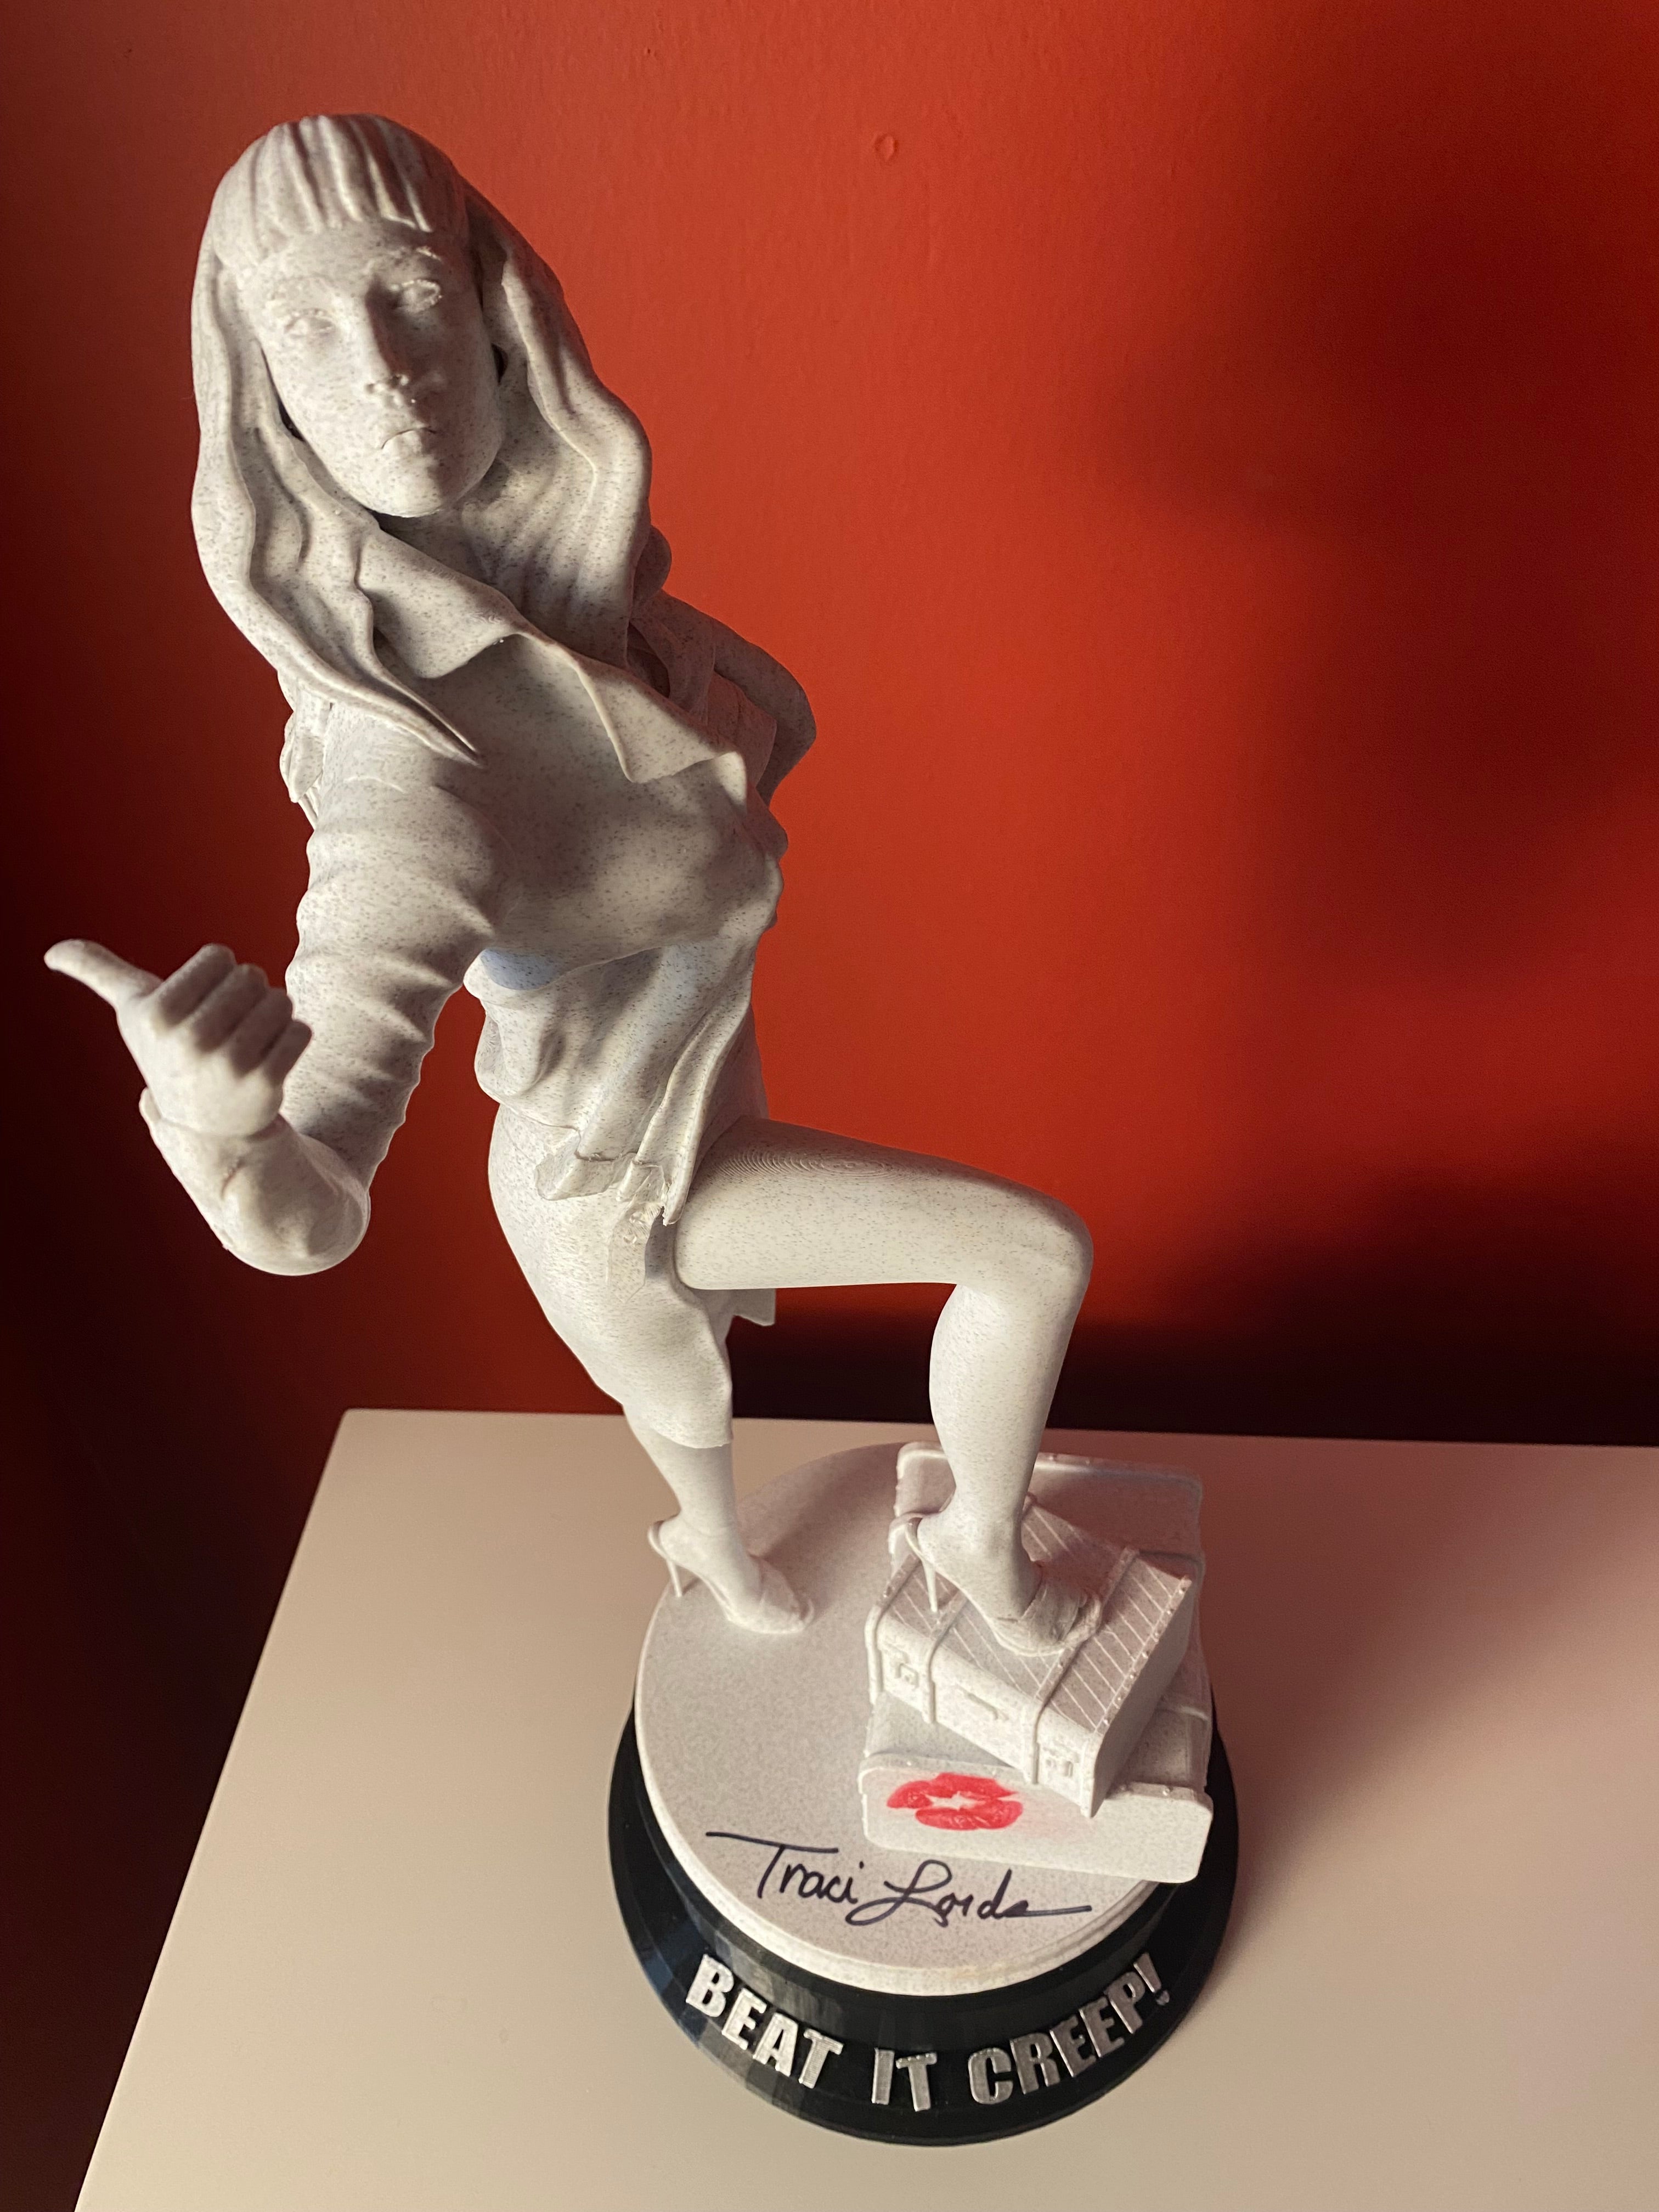 LIMITED EDITION! *** 19 INCH 3D PRINTED "BEAT IT CREEP" STATUE.